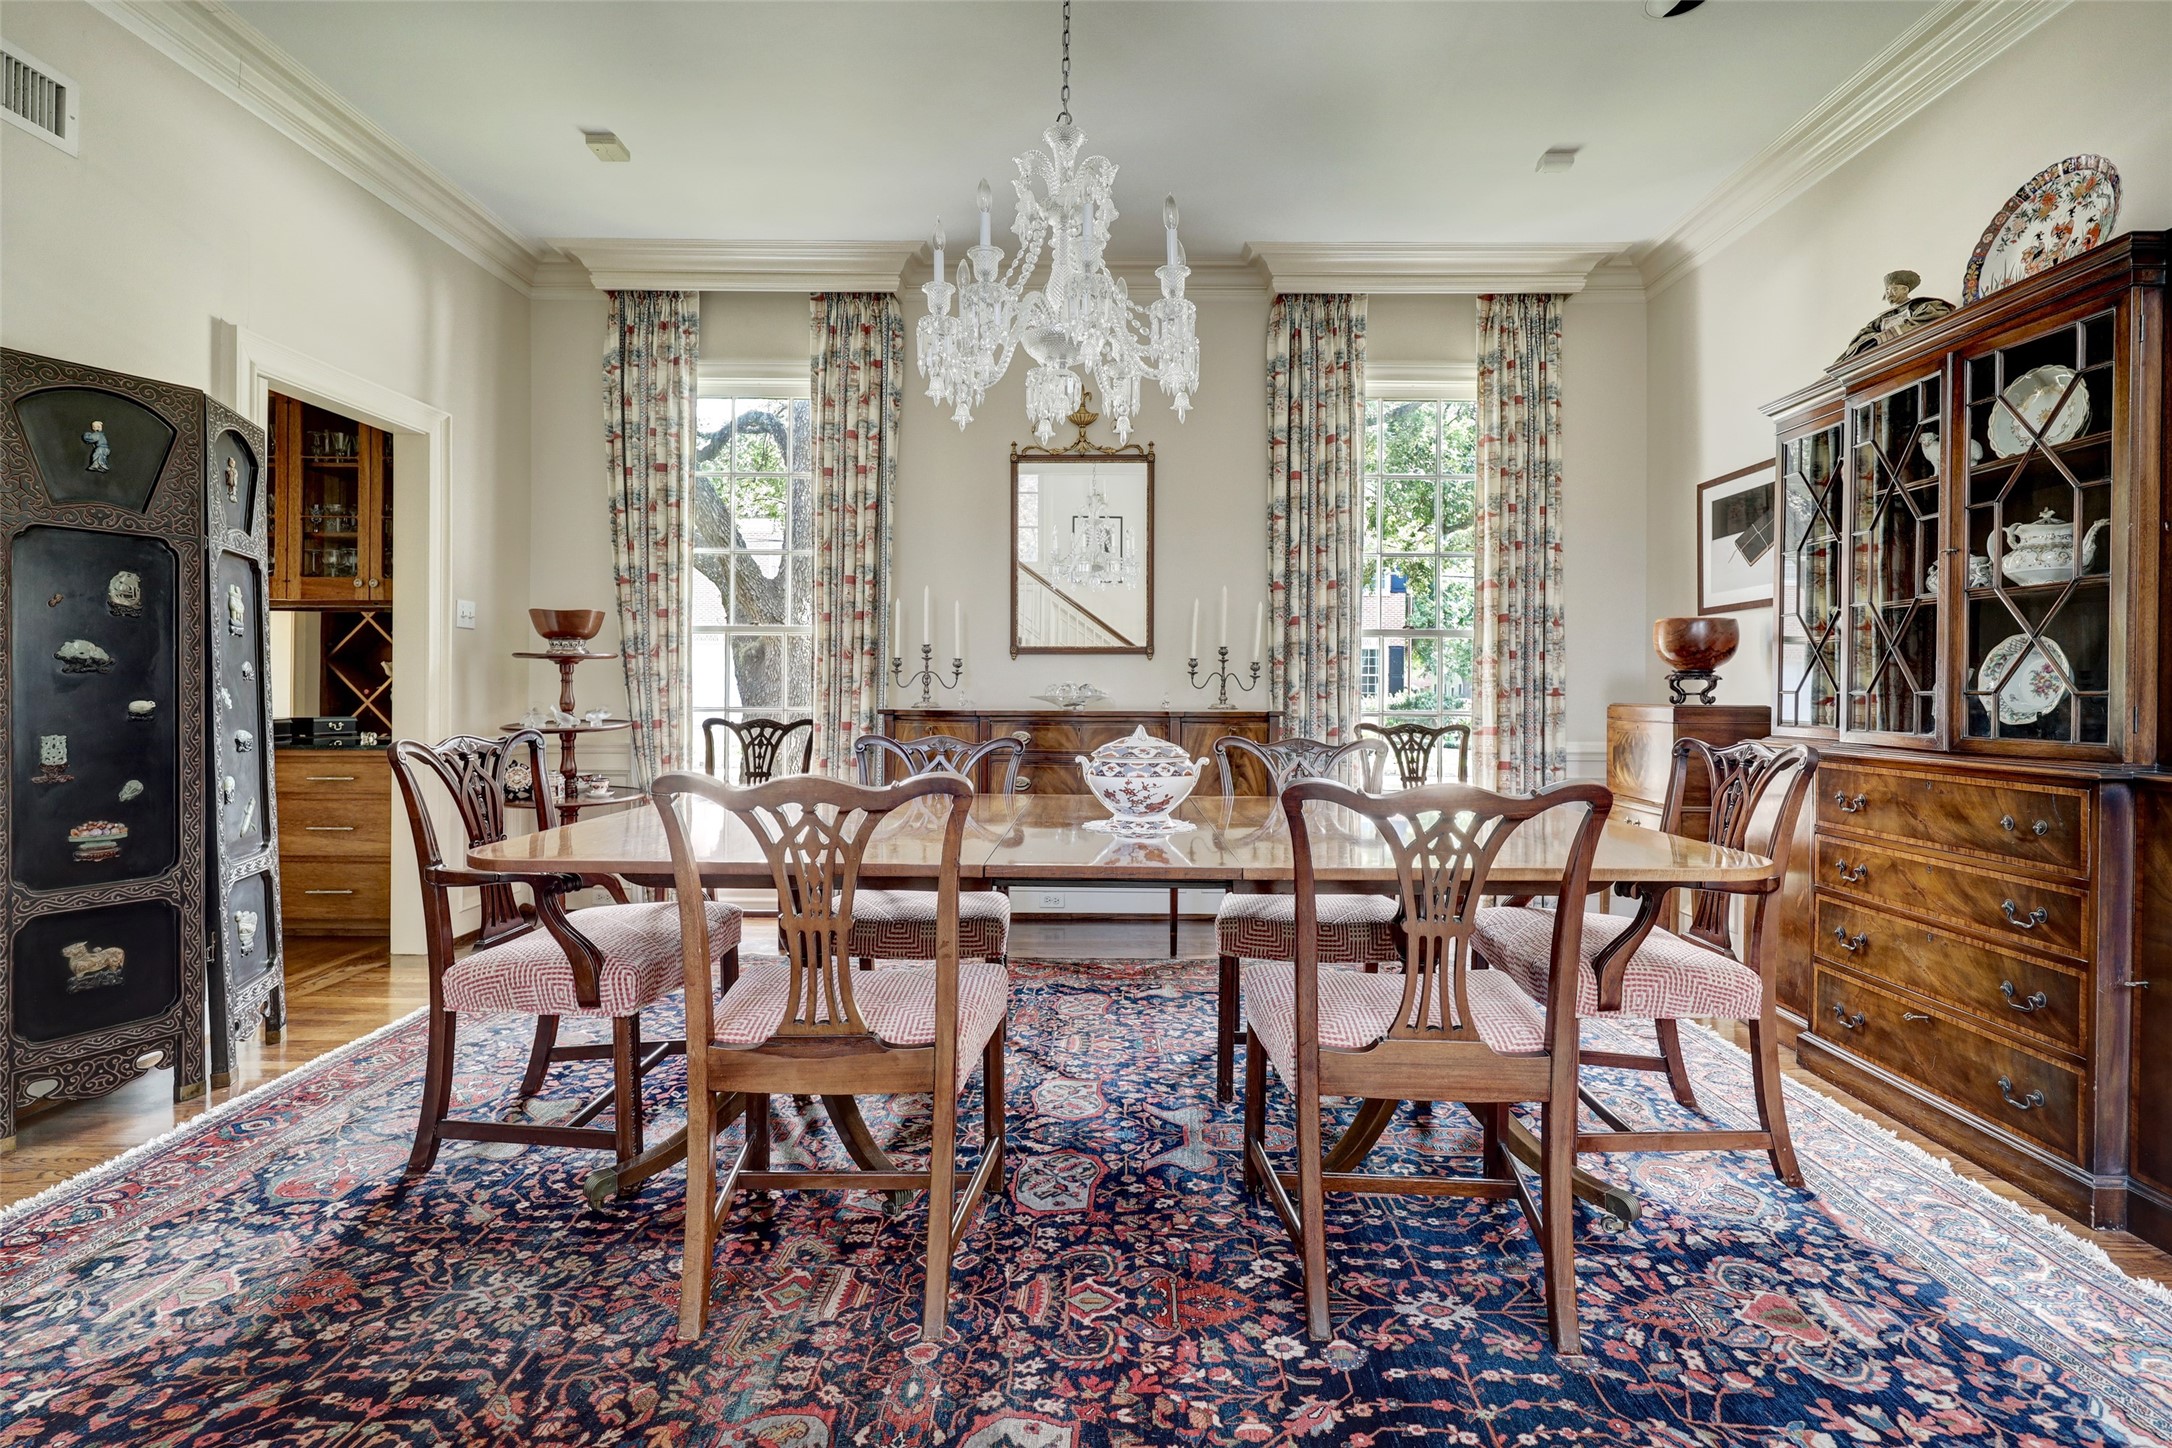 The formal dining room features large windows that flood the space with natural light, creating an elegant ambiance, and offers convenient access to the butler's pantry, making it perfect for hosting and serving meals with ease.